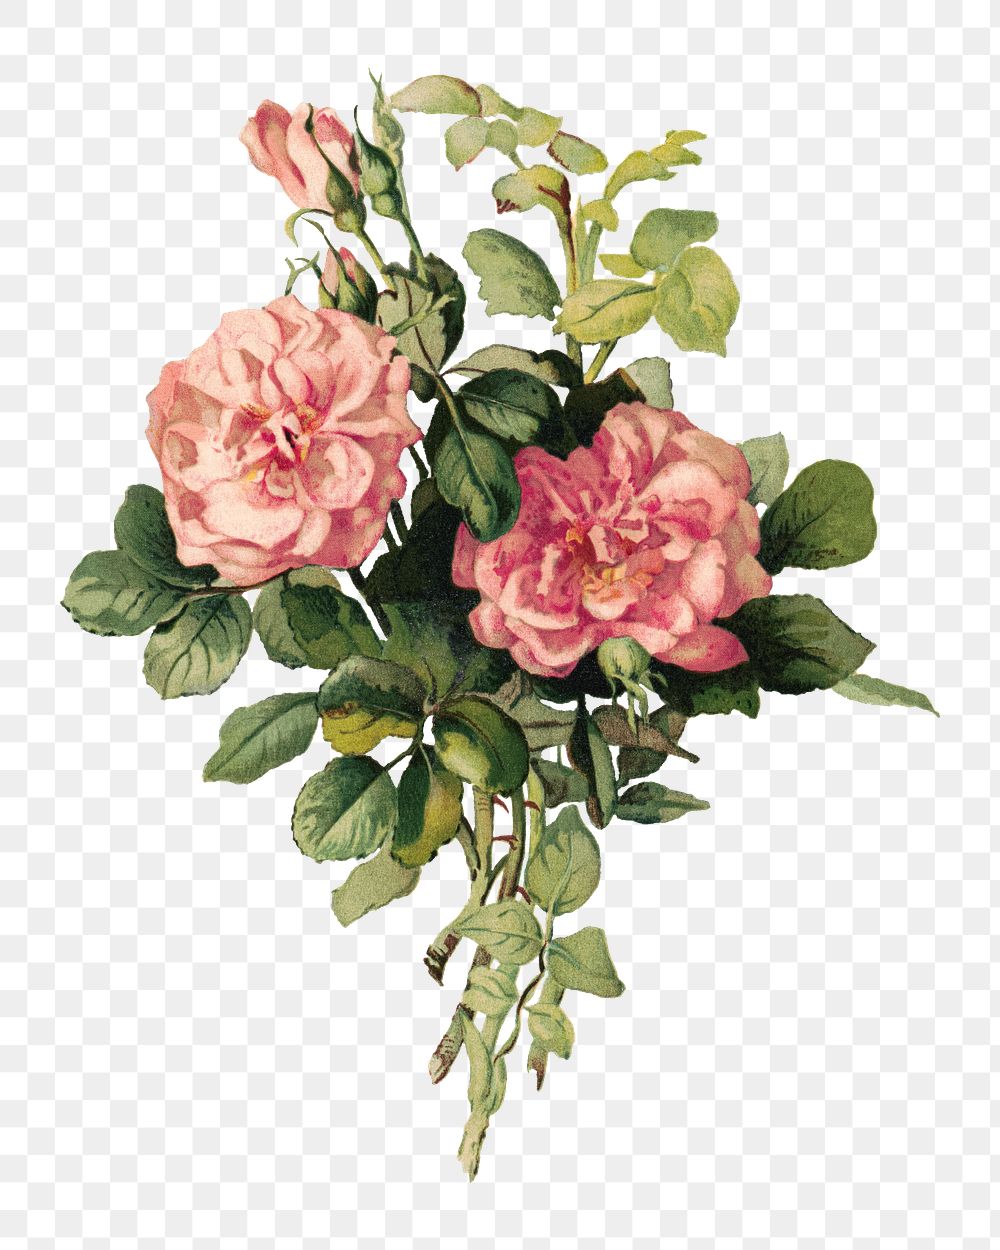 Aesthetic blush roses png on transparent background.   Remastered by rawpixel